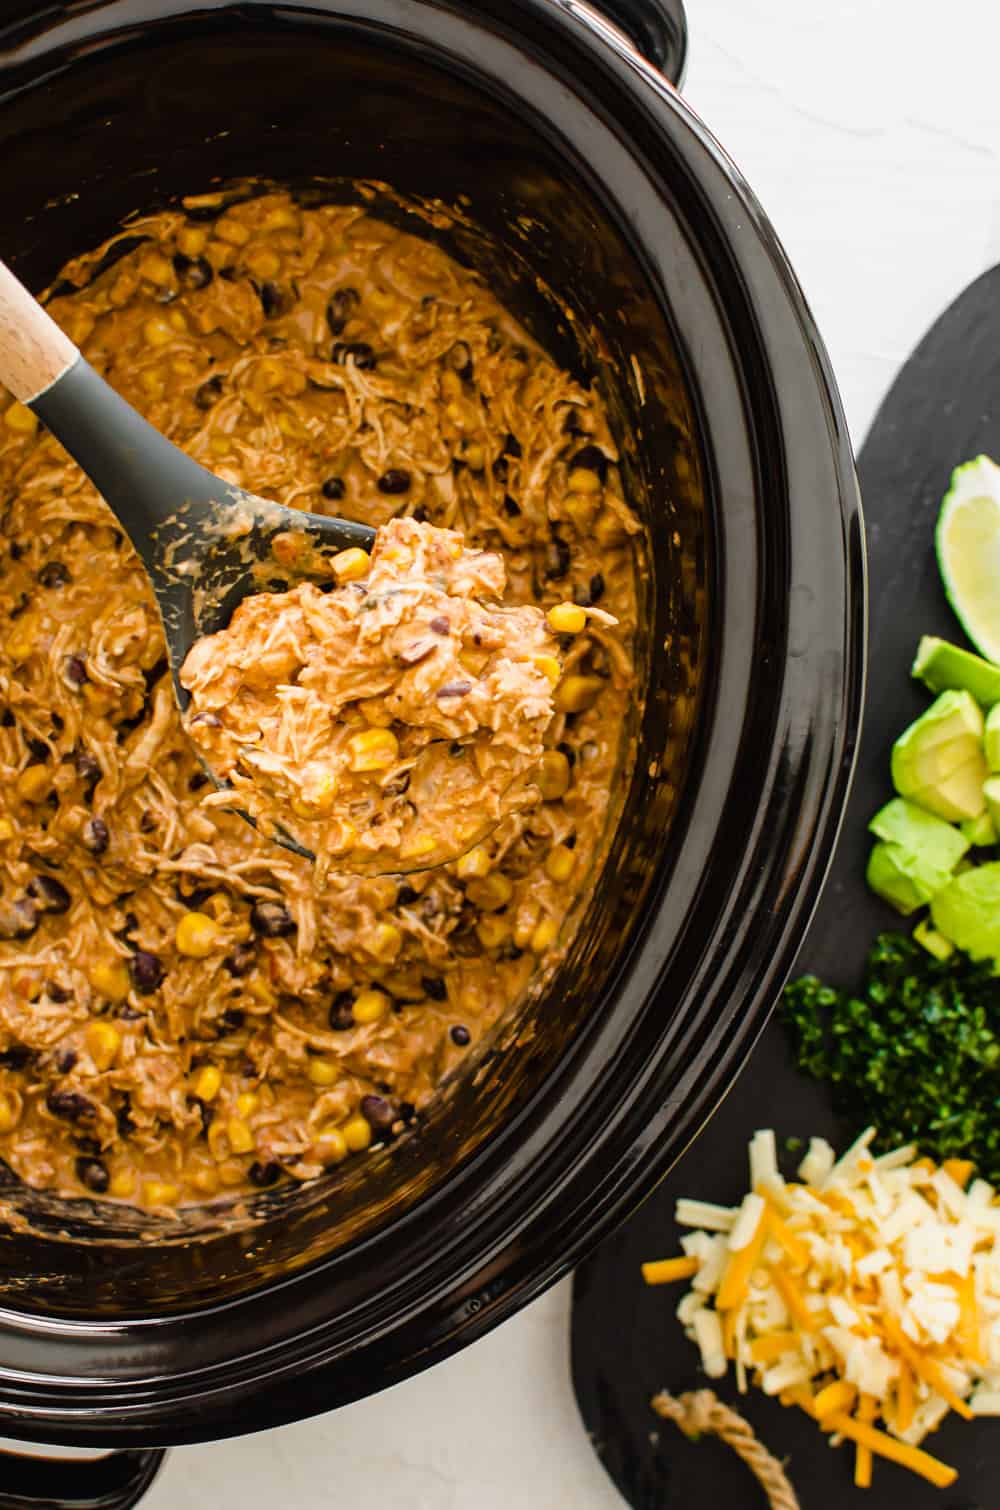 Crockpot Mexican chicken ready to be served from the crockpot with a wooden spoon lifting some out.